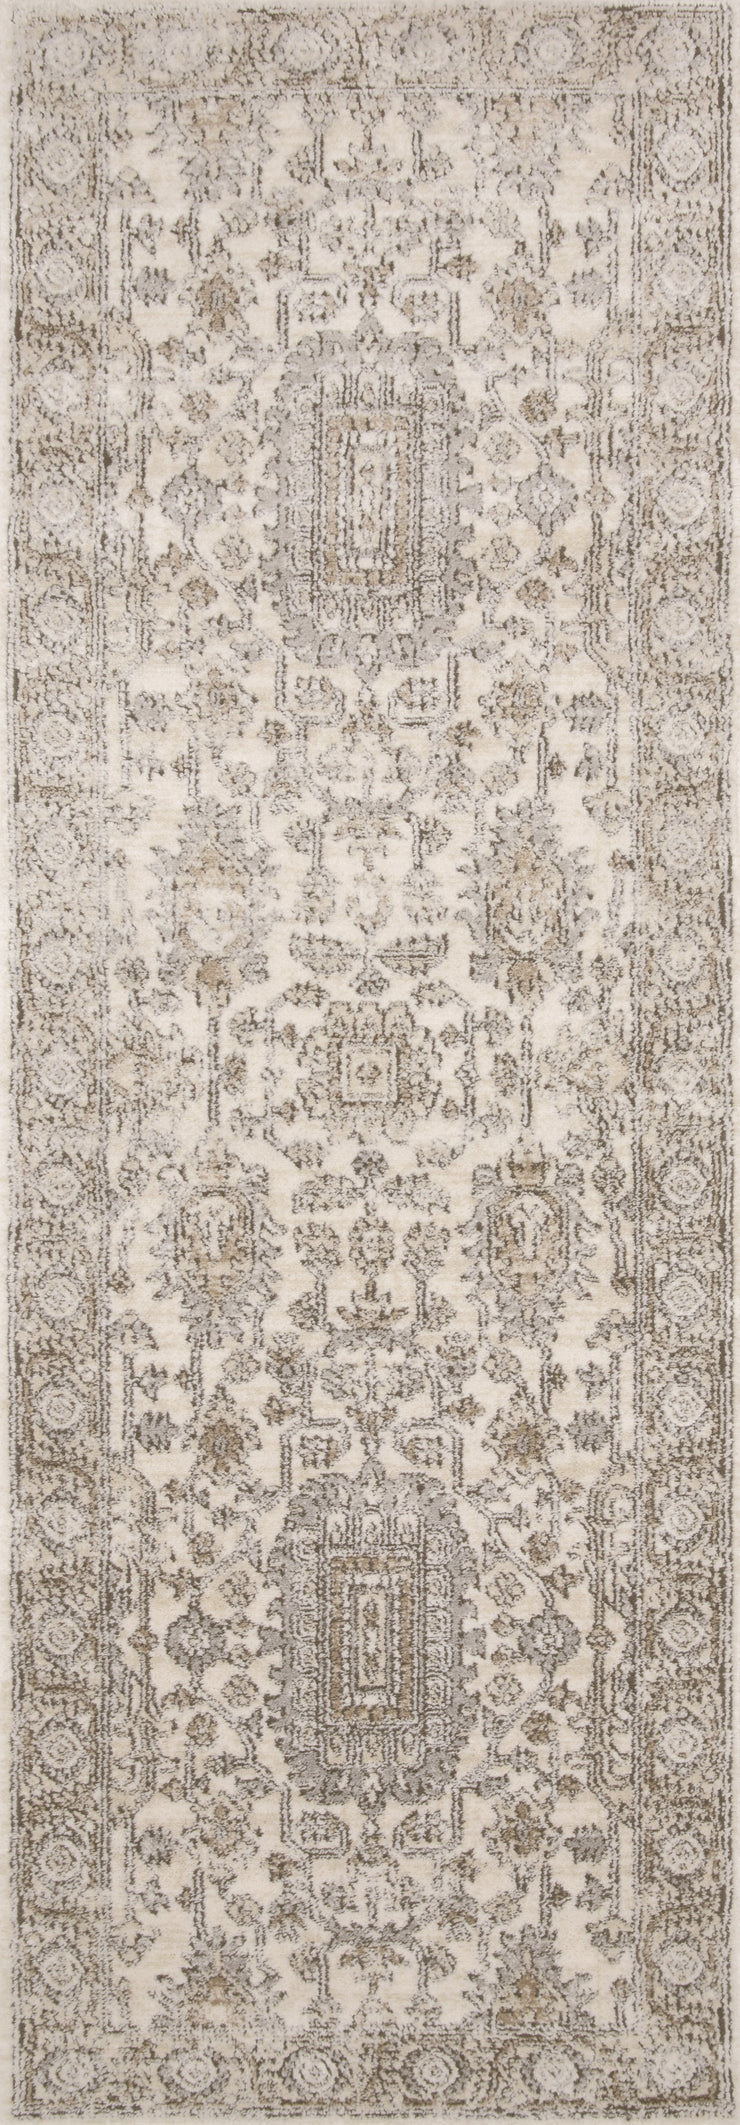 Teagan Rug in Ivory / Sand by Loloi II